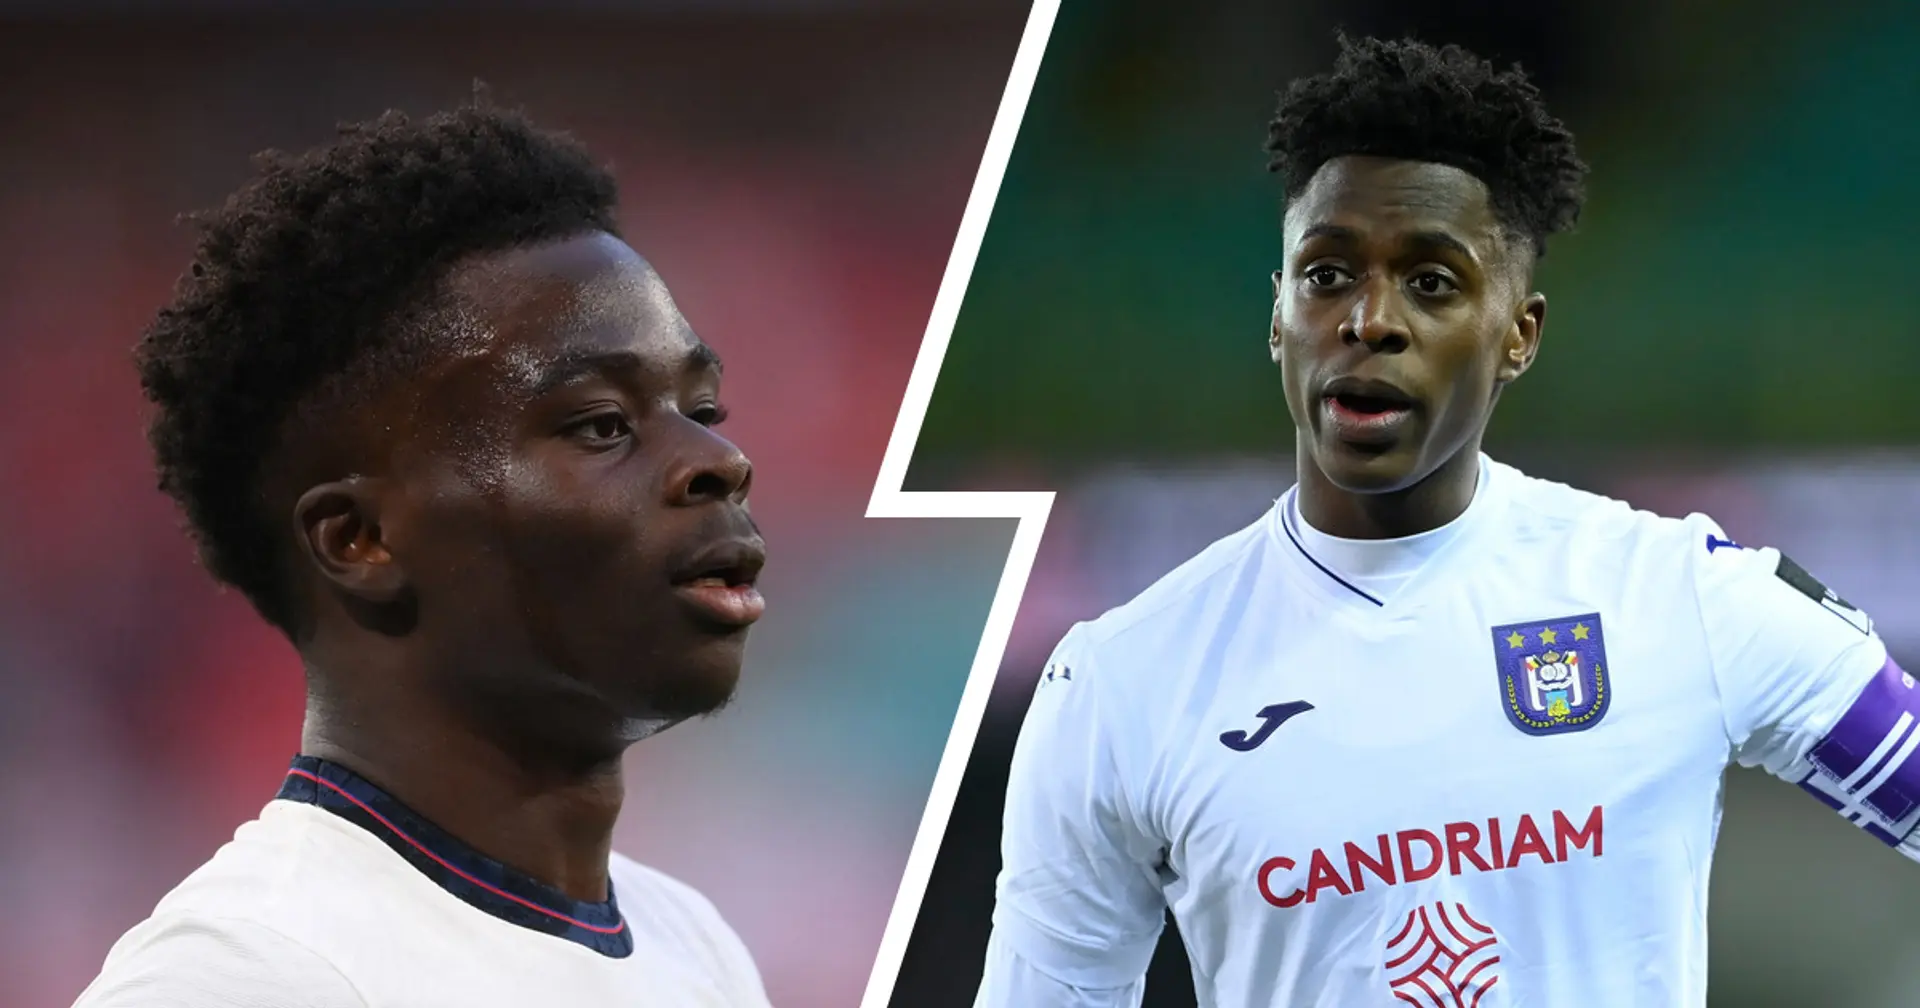 England reach Euros last 8 with Saka starting & 5 other big stories you might have missed